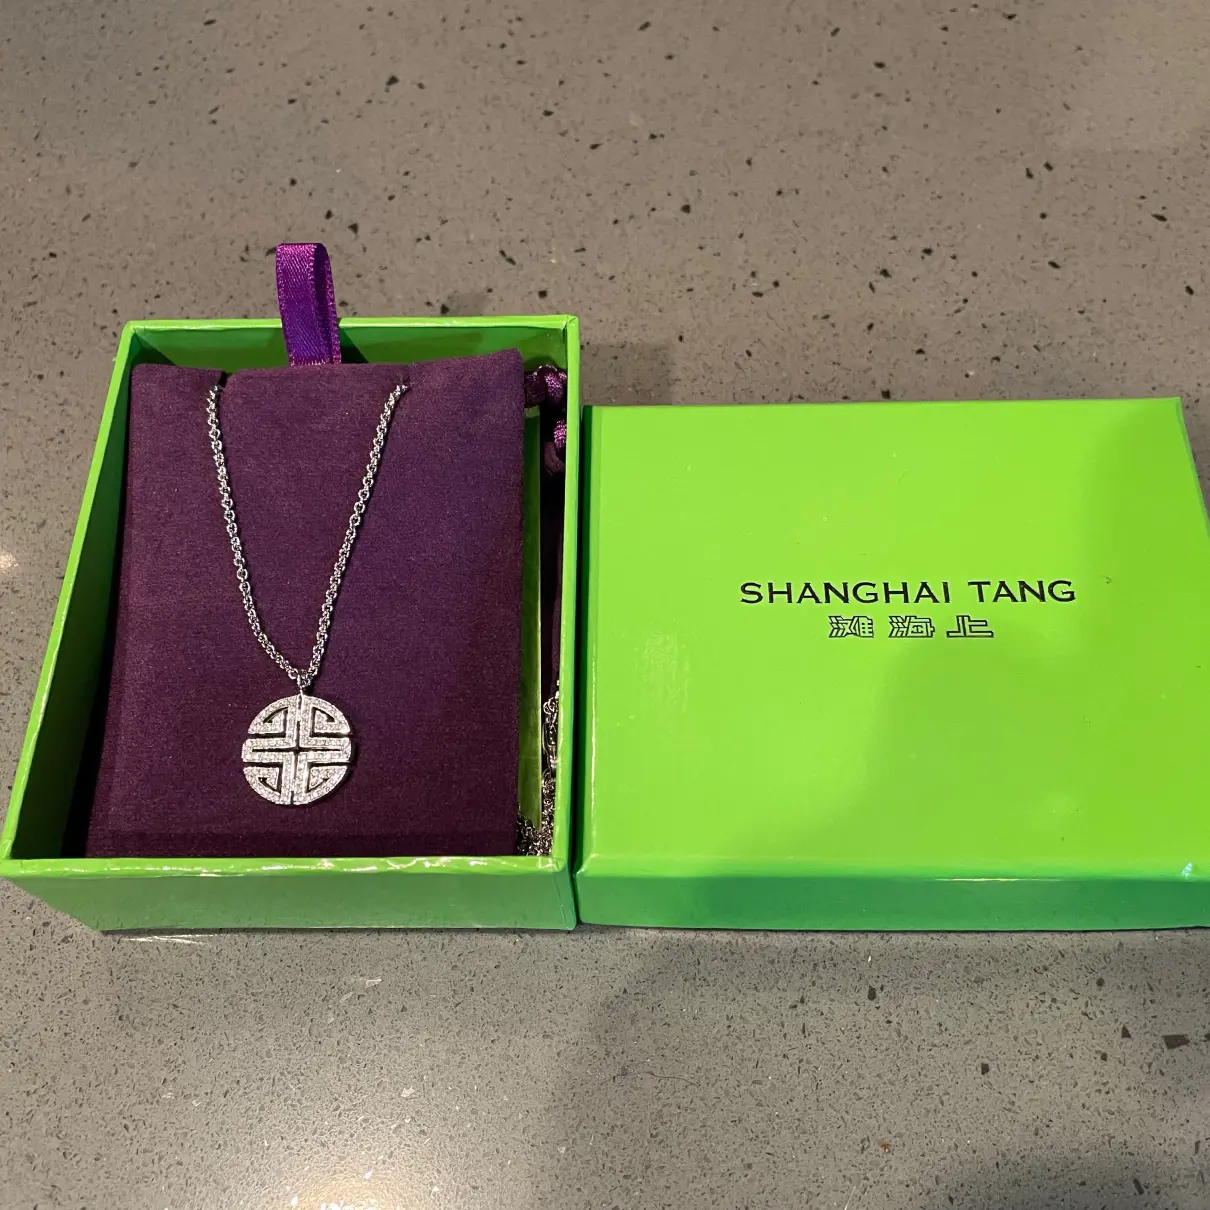 Silver necklace SHANGHAI TANG